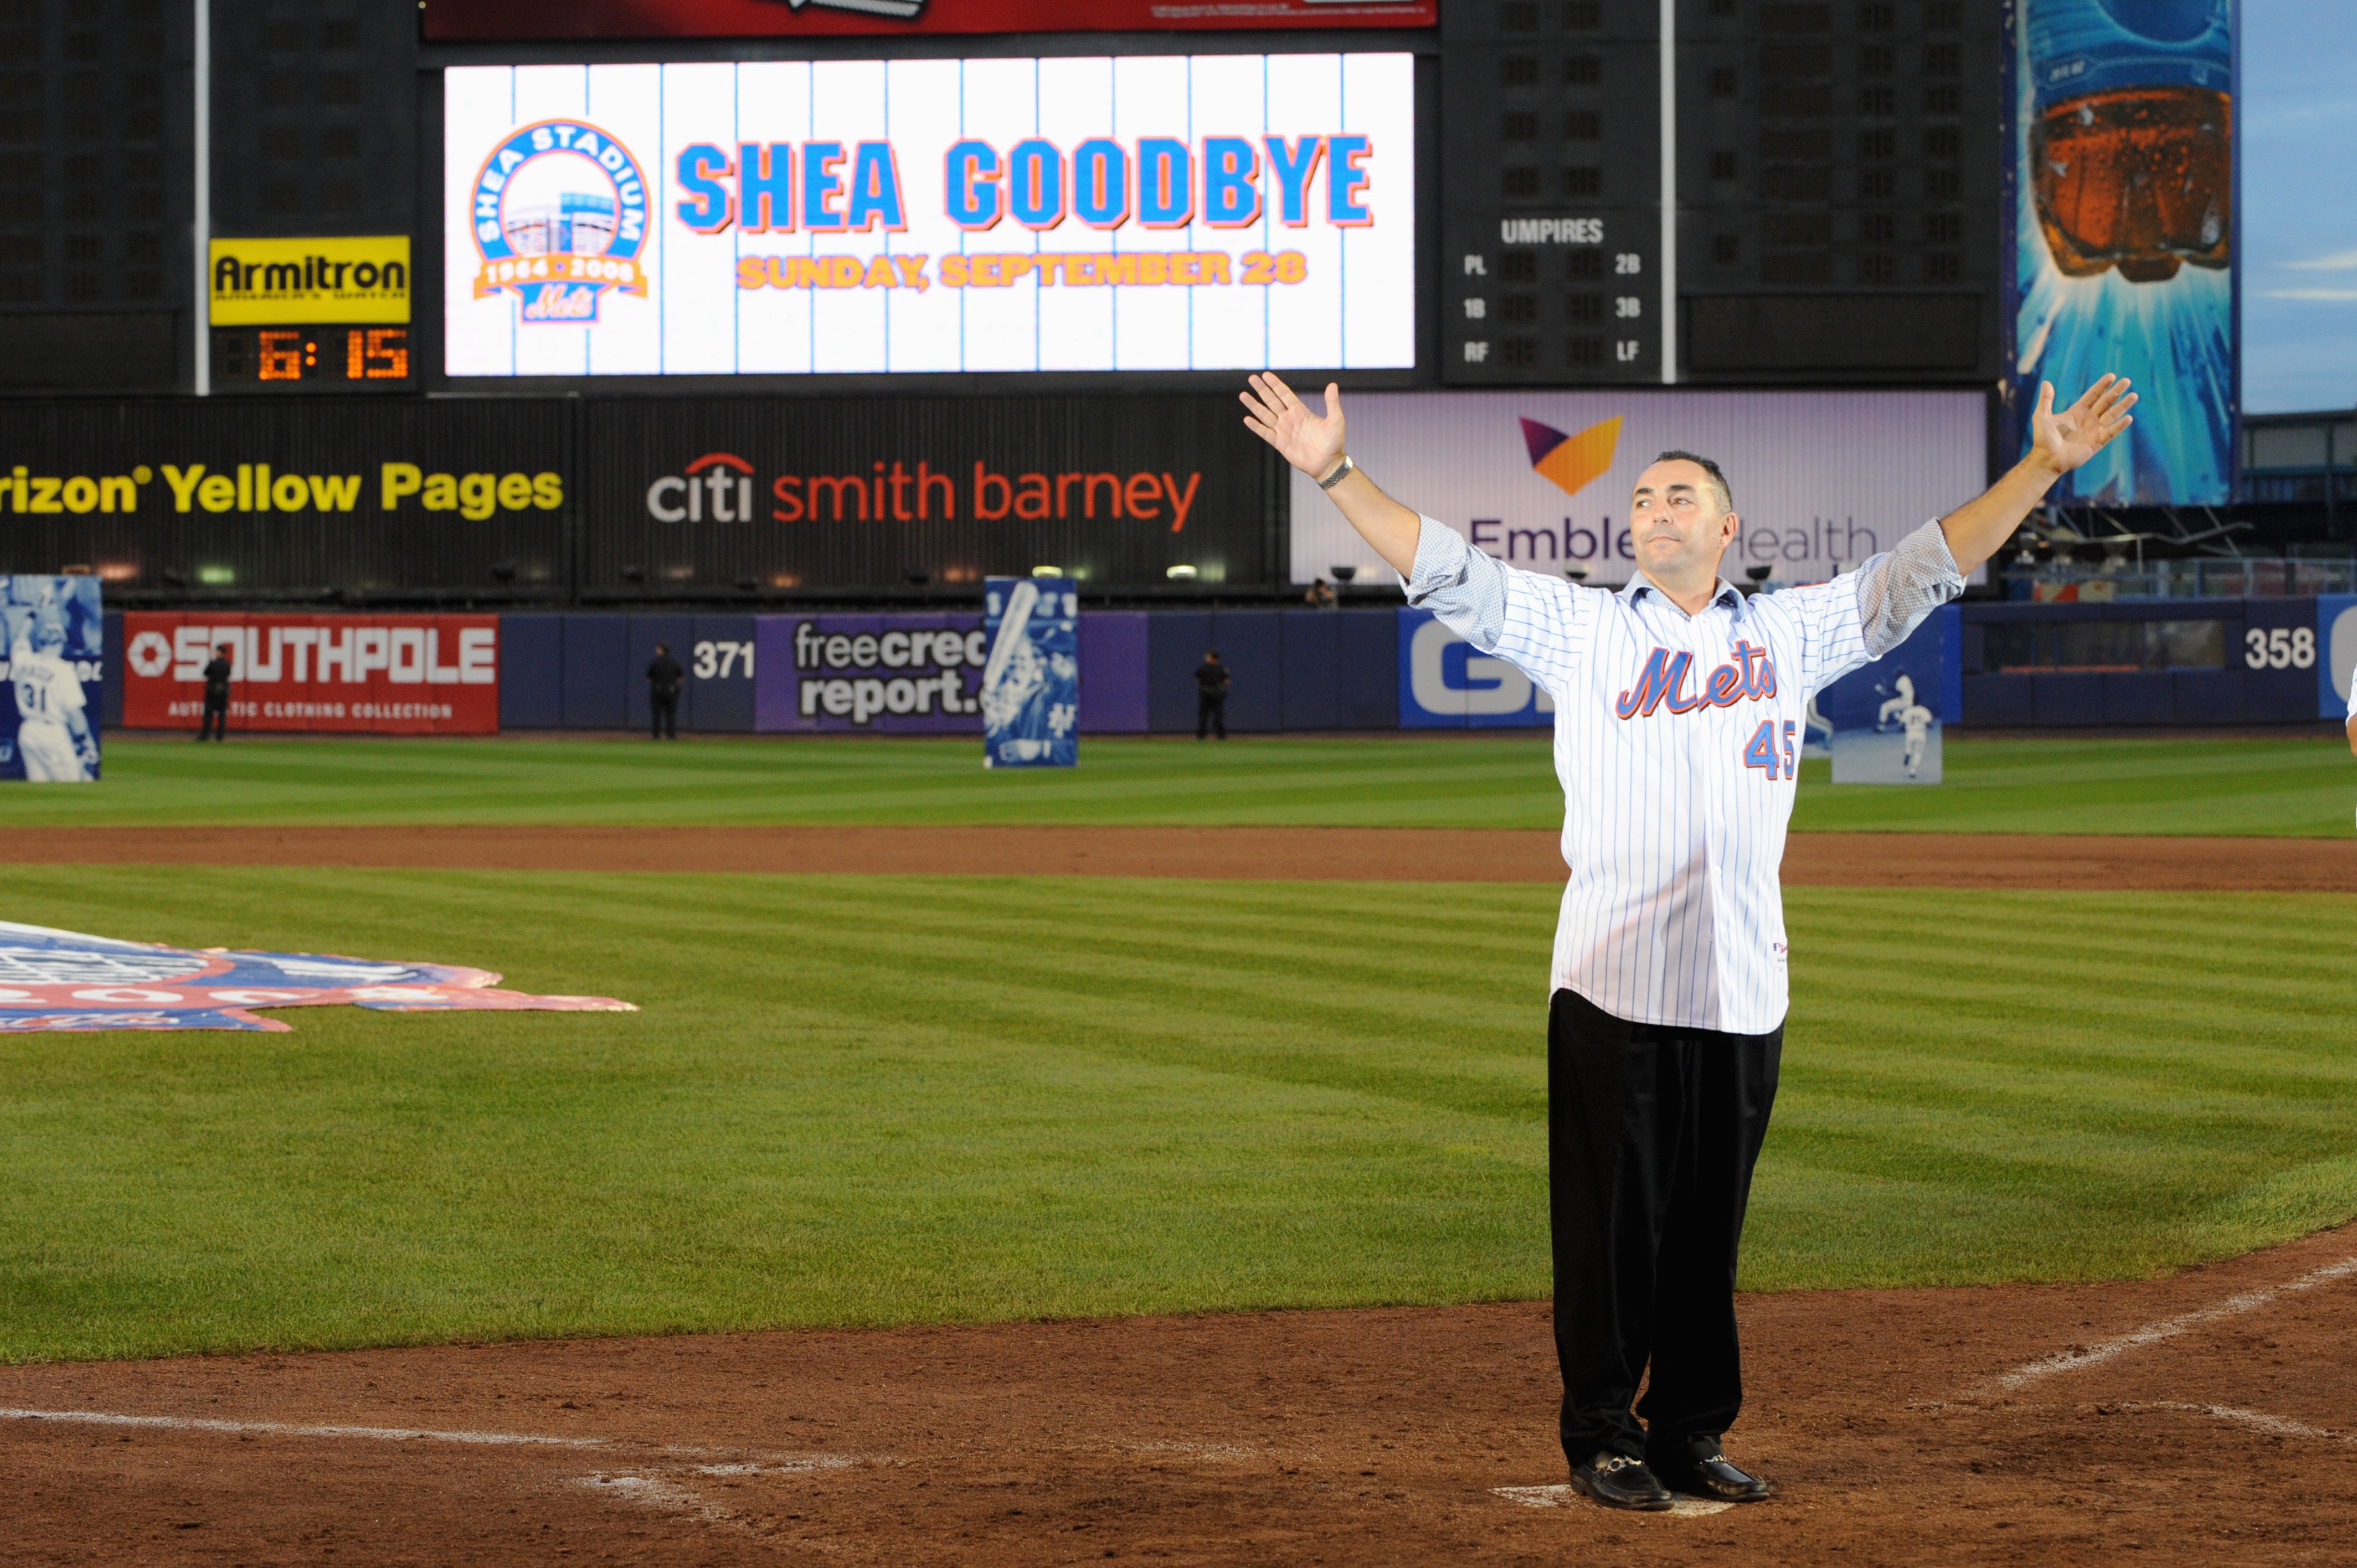 NEW YORK - SEPTEMBER 28:  Former New York Mets players John Franco waves to the fans at home plate after the game against the Florida Marlins to commemorate the last regular season baseball game ever played in Shea Stadium on September 28, 2008 in the Flu